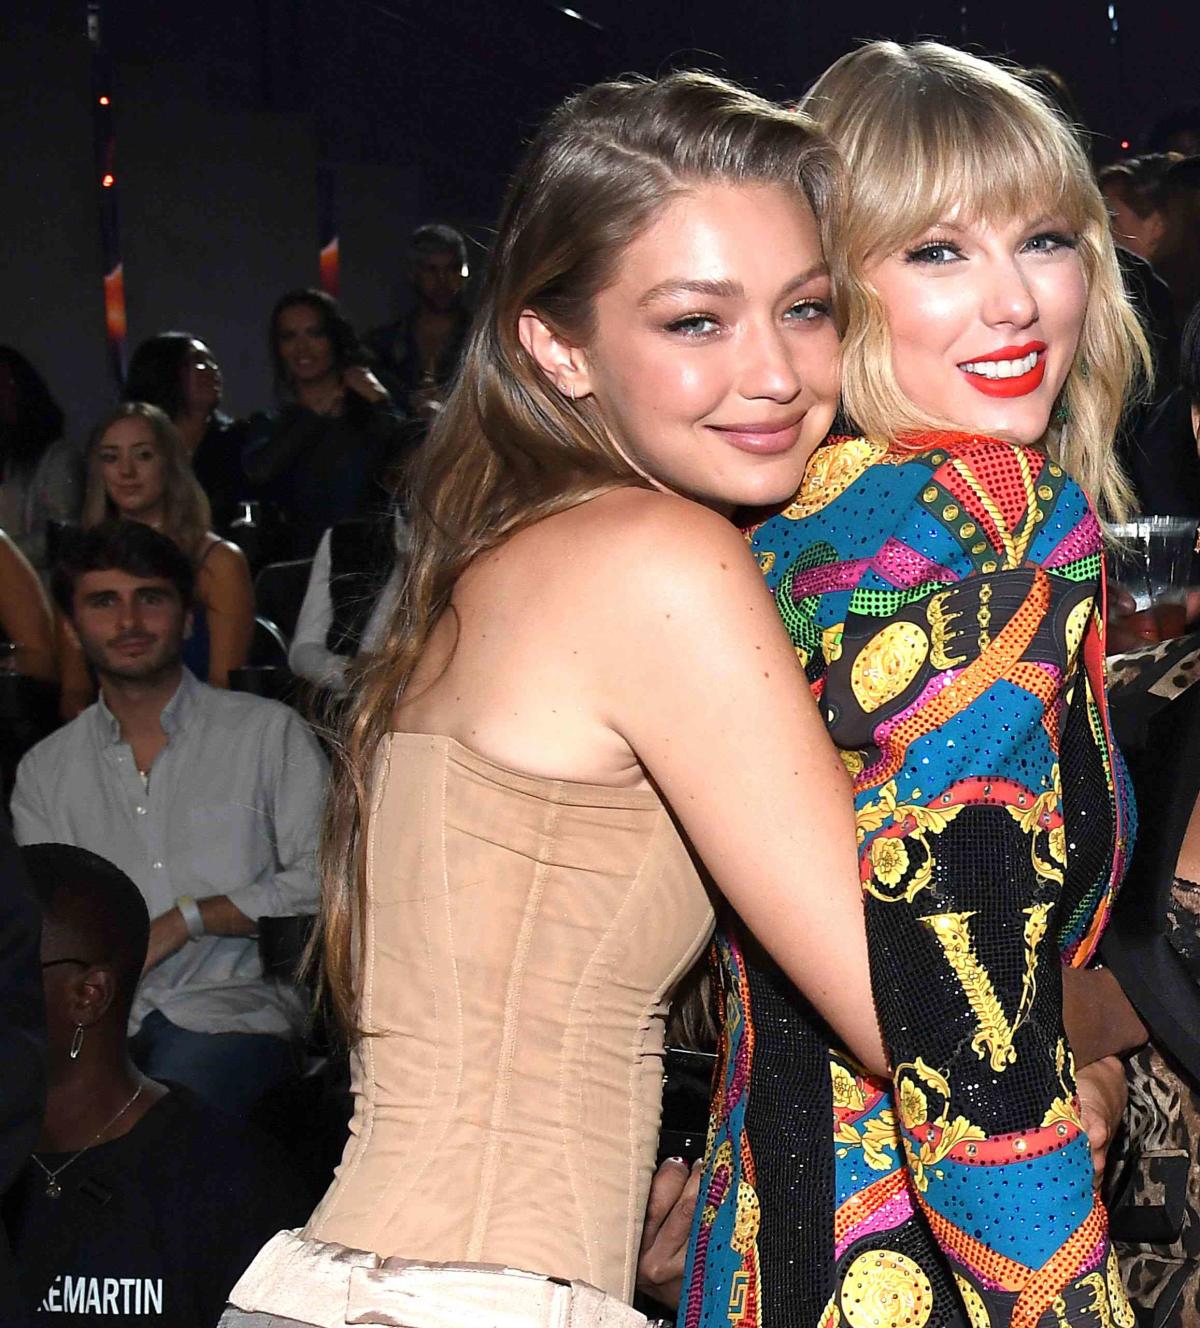 Gigi Hadid Said She Is An Embarrassing Friend At Taylor Swift Concerts